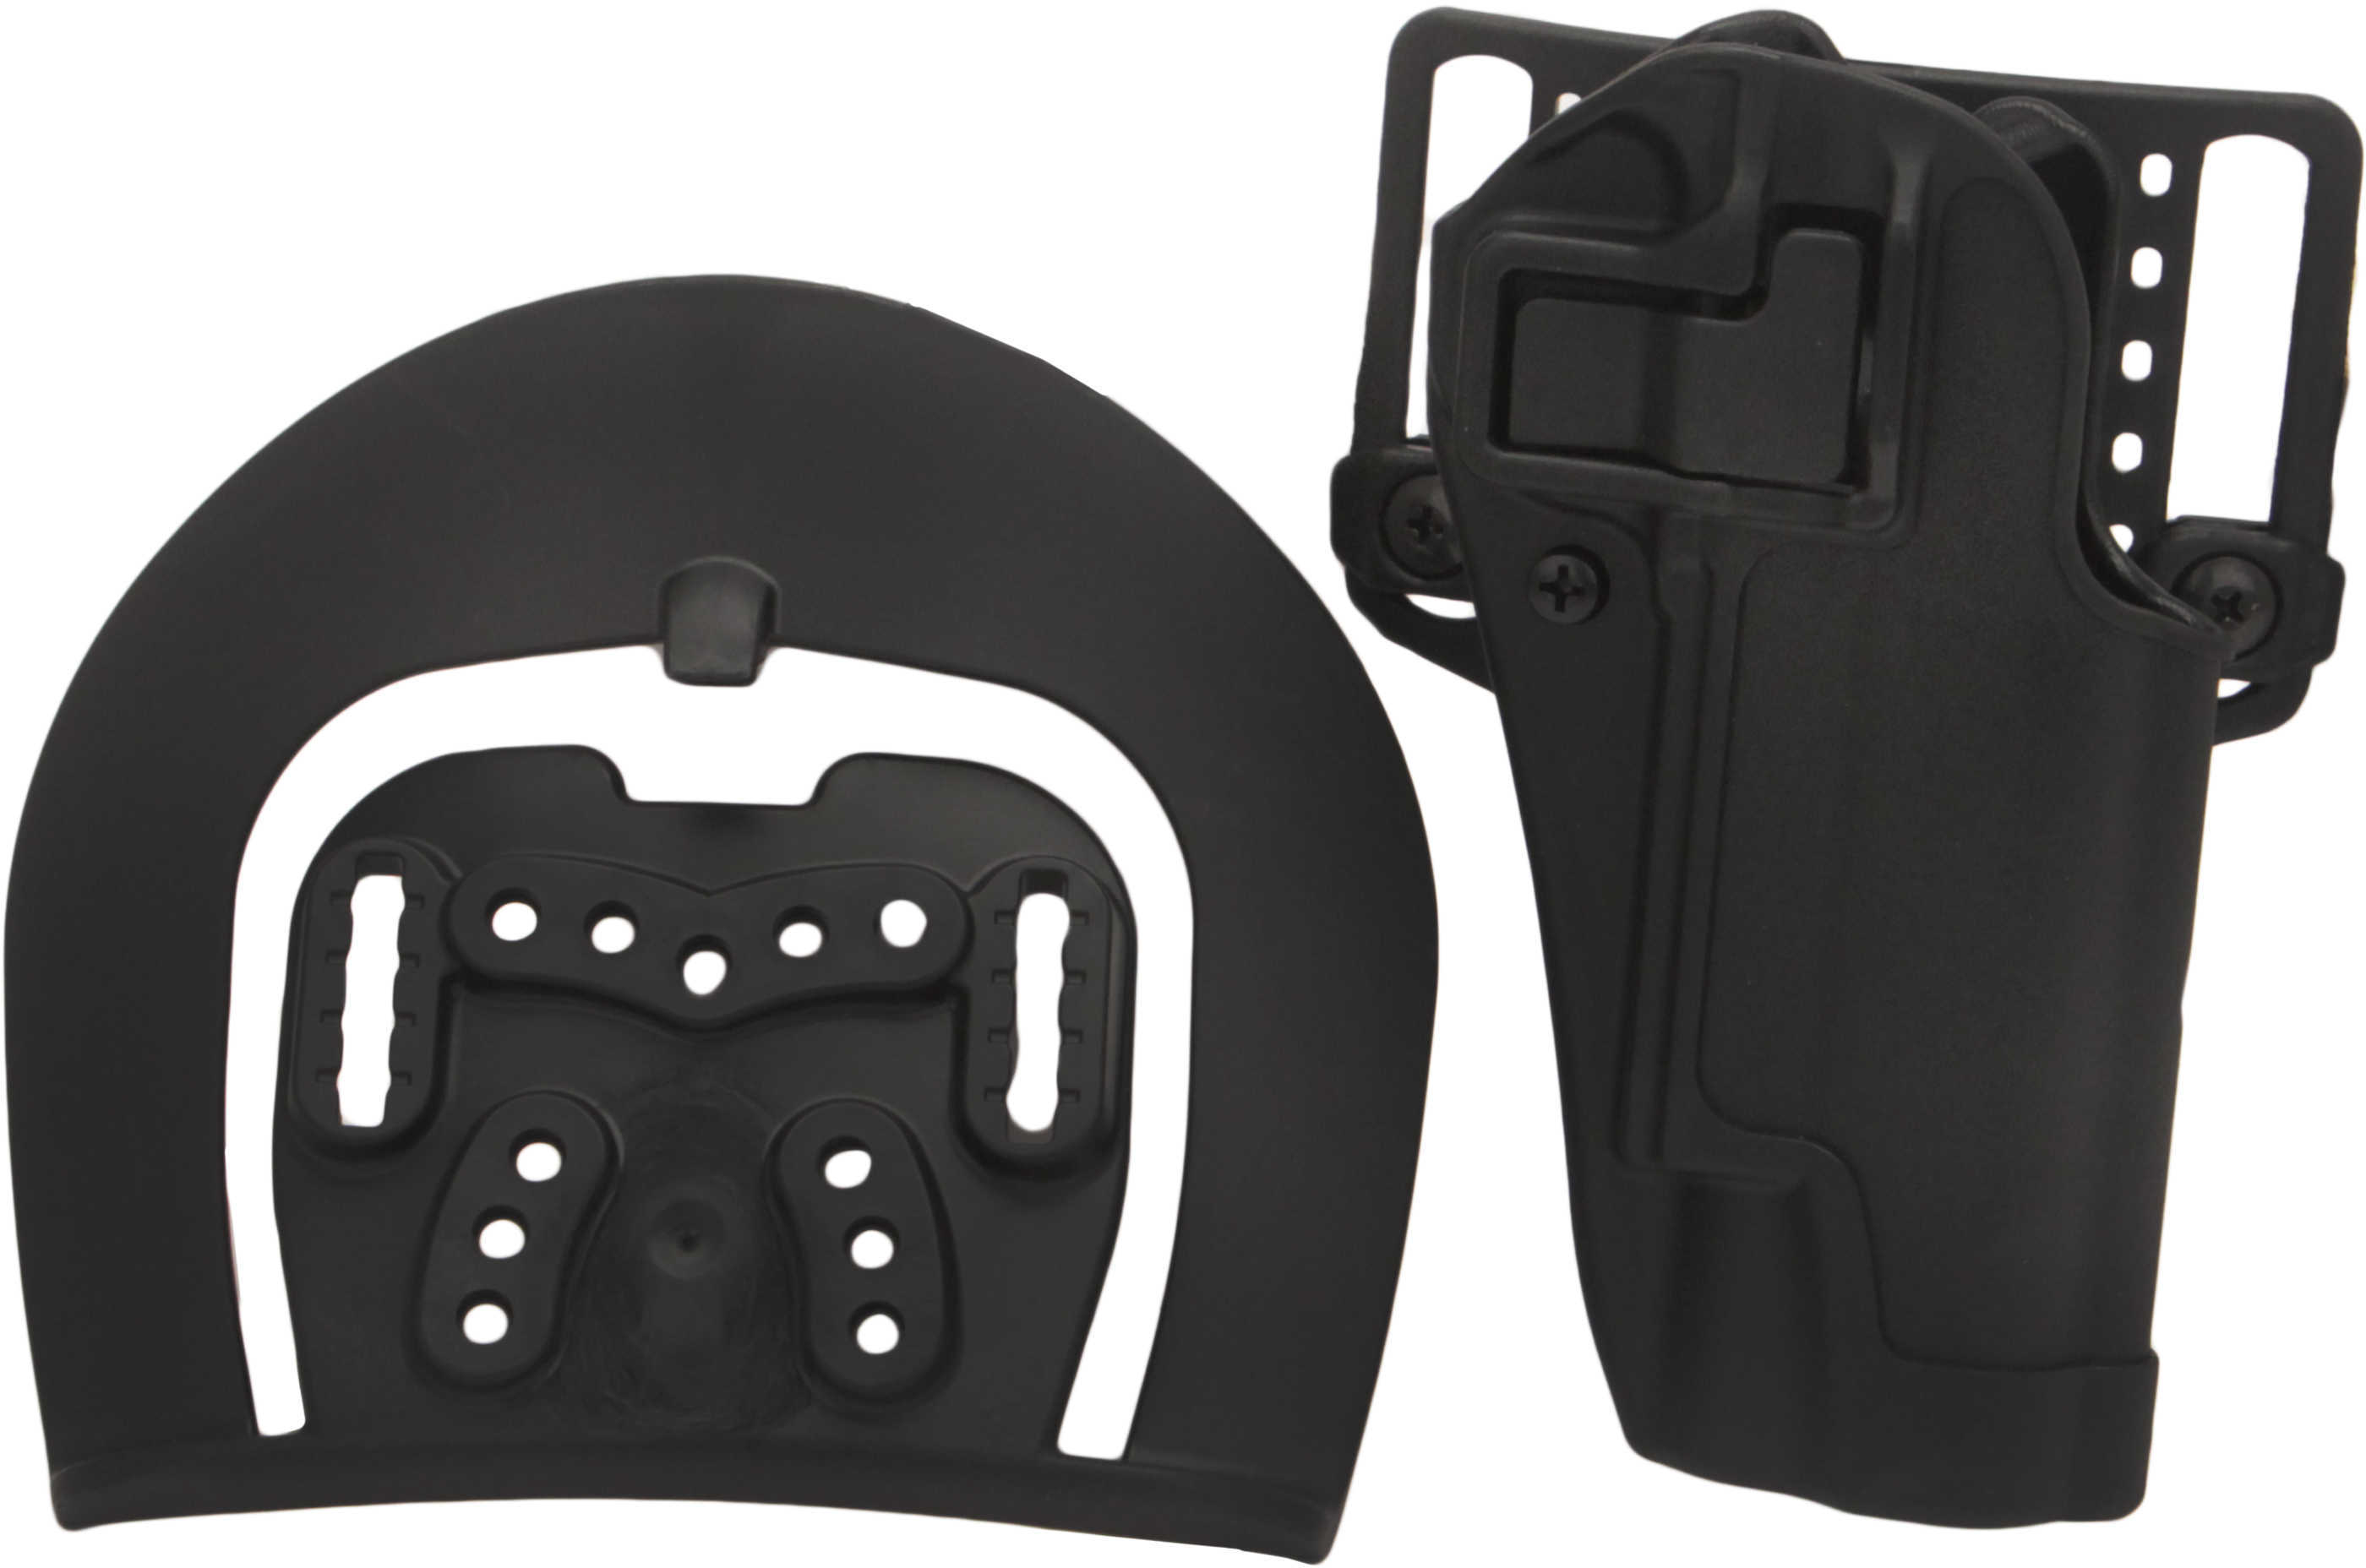 Blackhawk Serpa CQC Matte Holster With Active Retention System - Right Size 03: 1911 Govt & Clones W/ Or